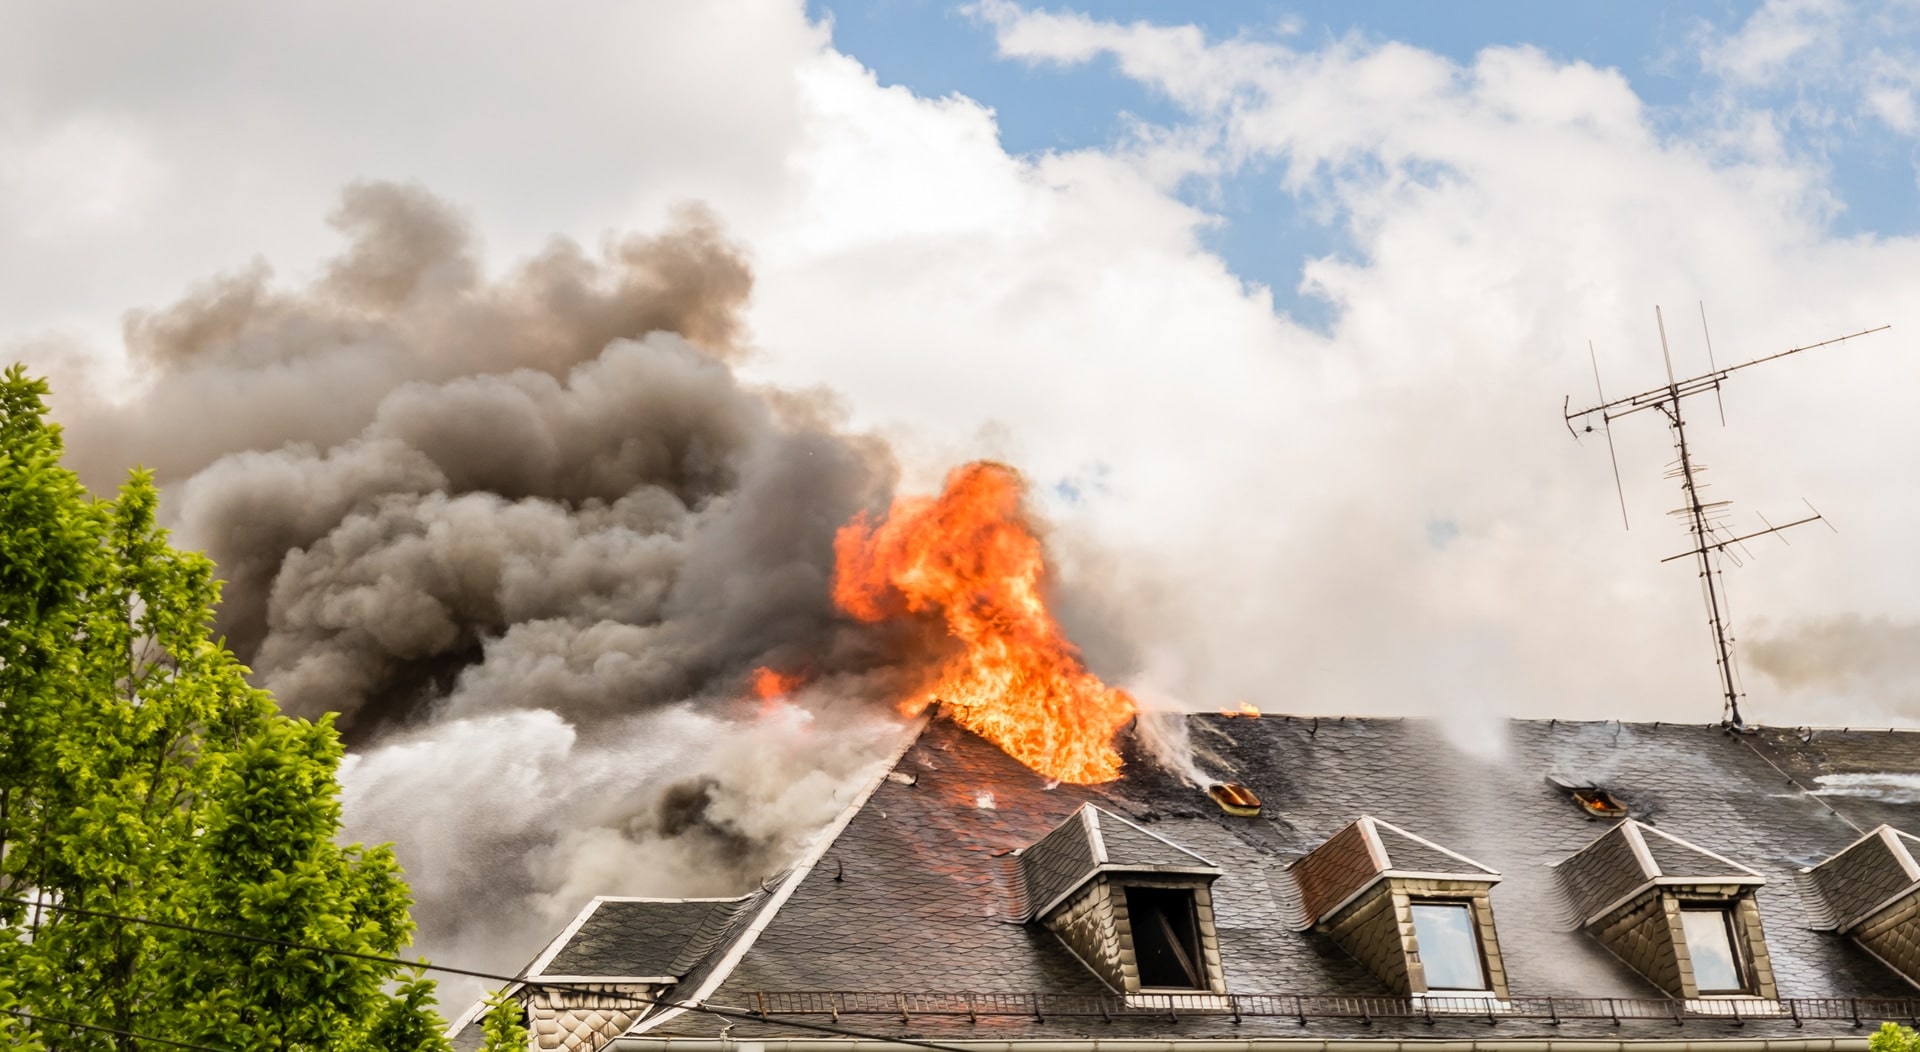 What Is Fire Restoration, and What Should I Expect in the Process?